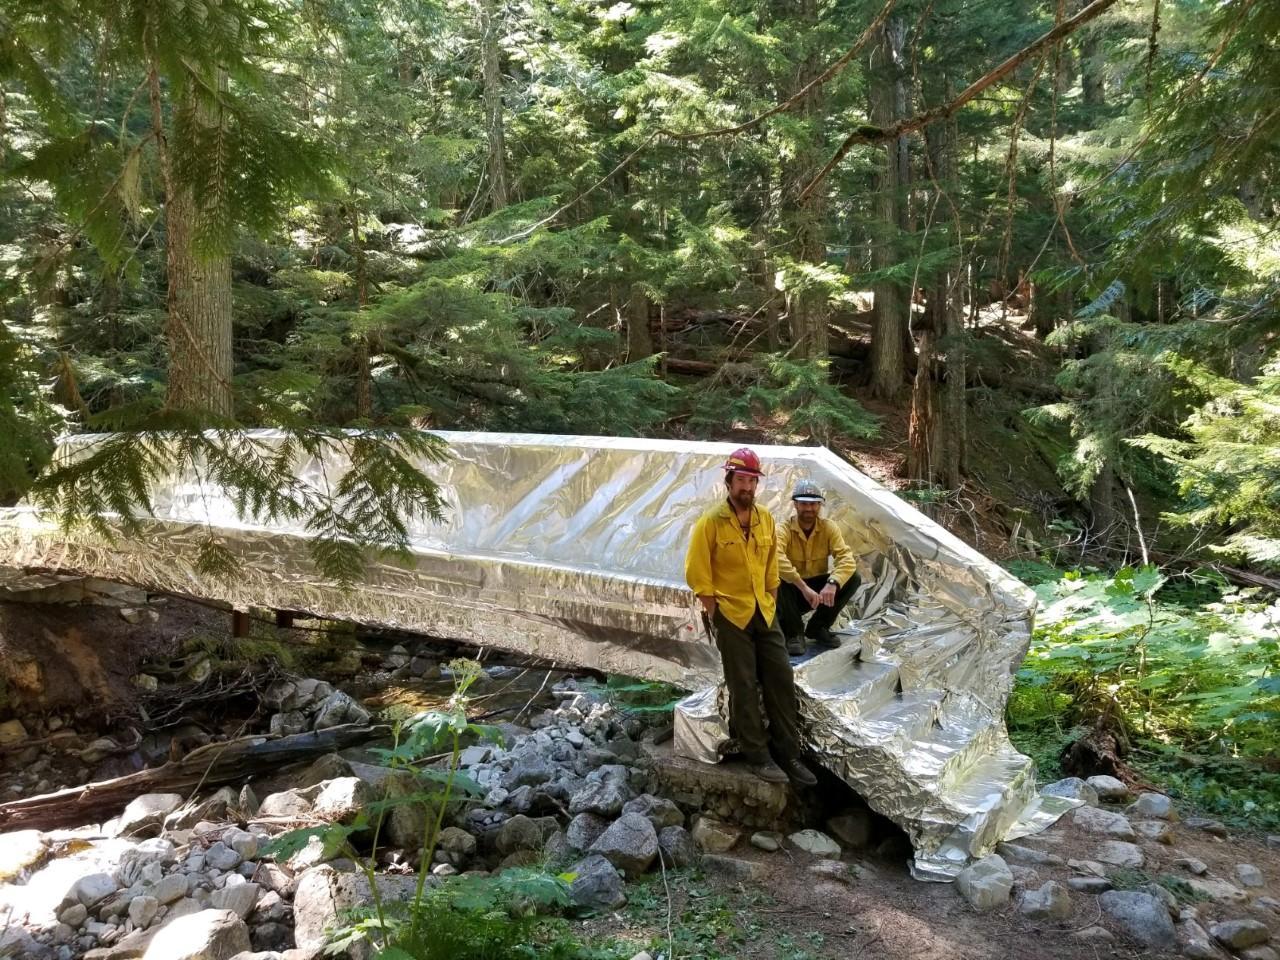 Local Cabinet Ranger District employees and firefighters wrap the bridge on the St. Paul Trail #646 with heat resistant material on 9.5.2022